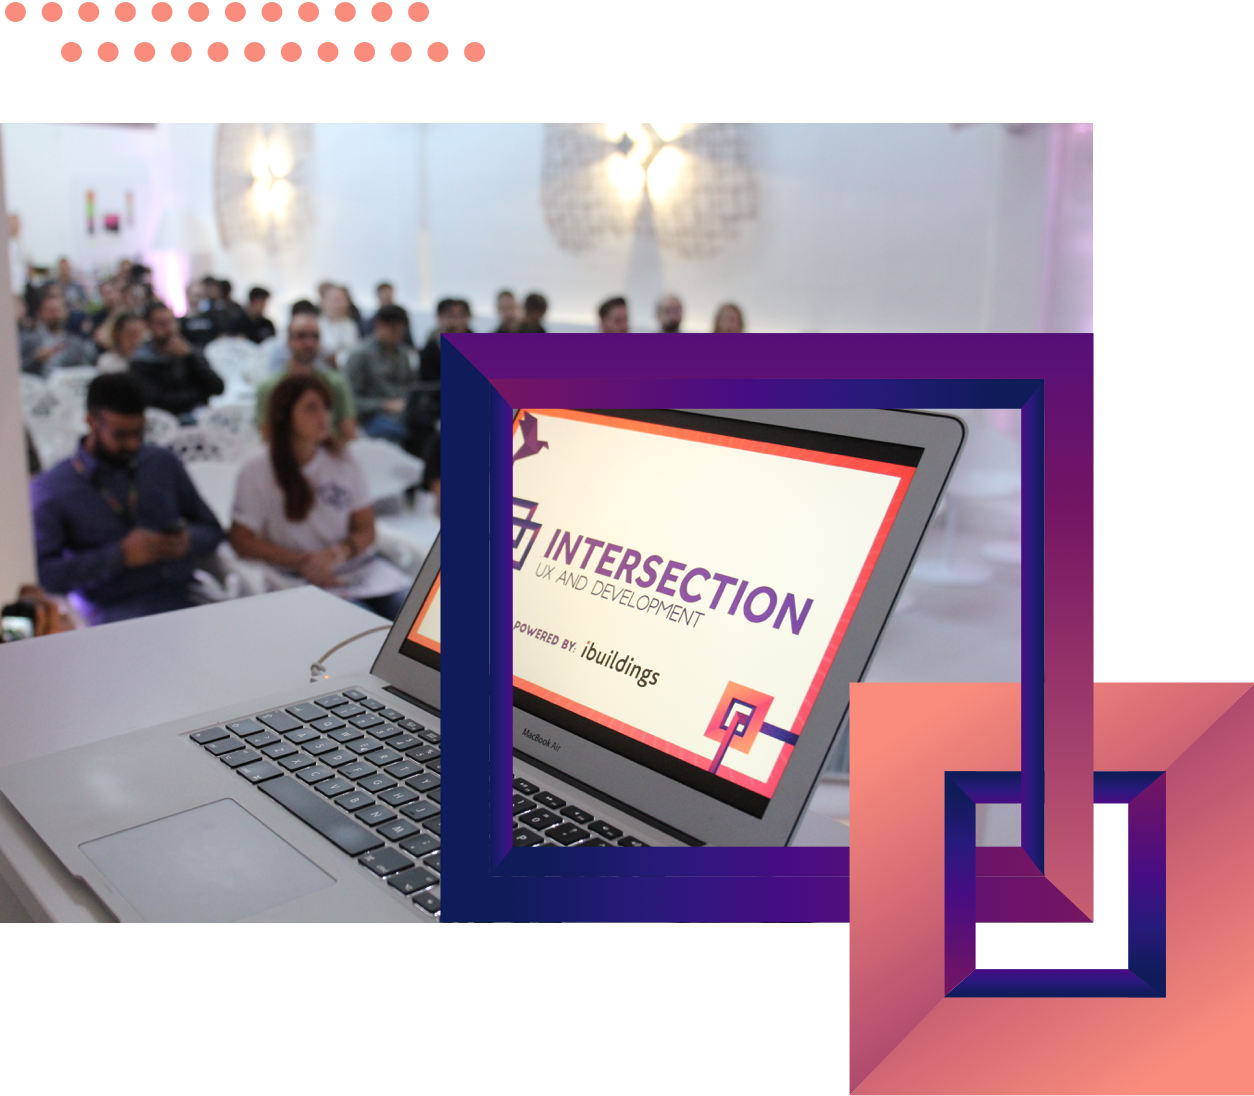 Intersection conference